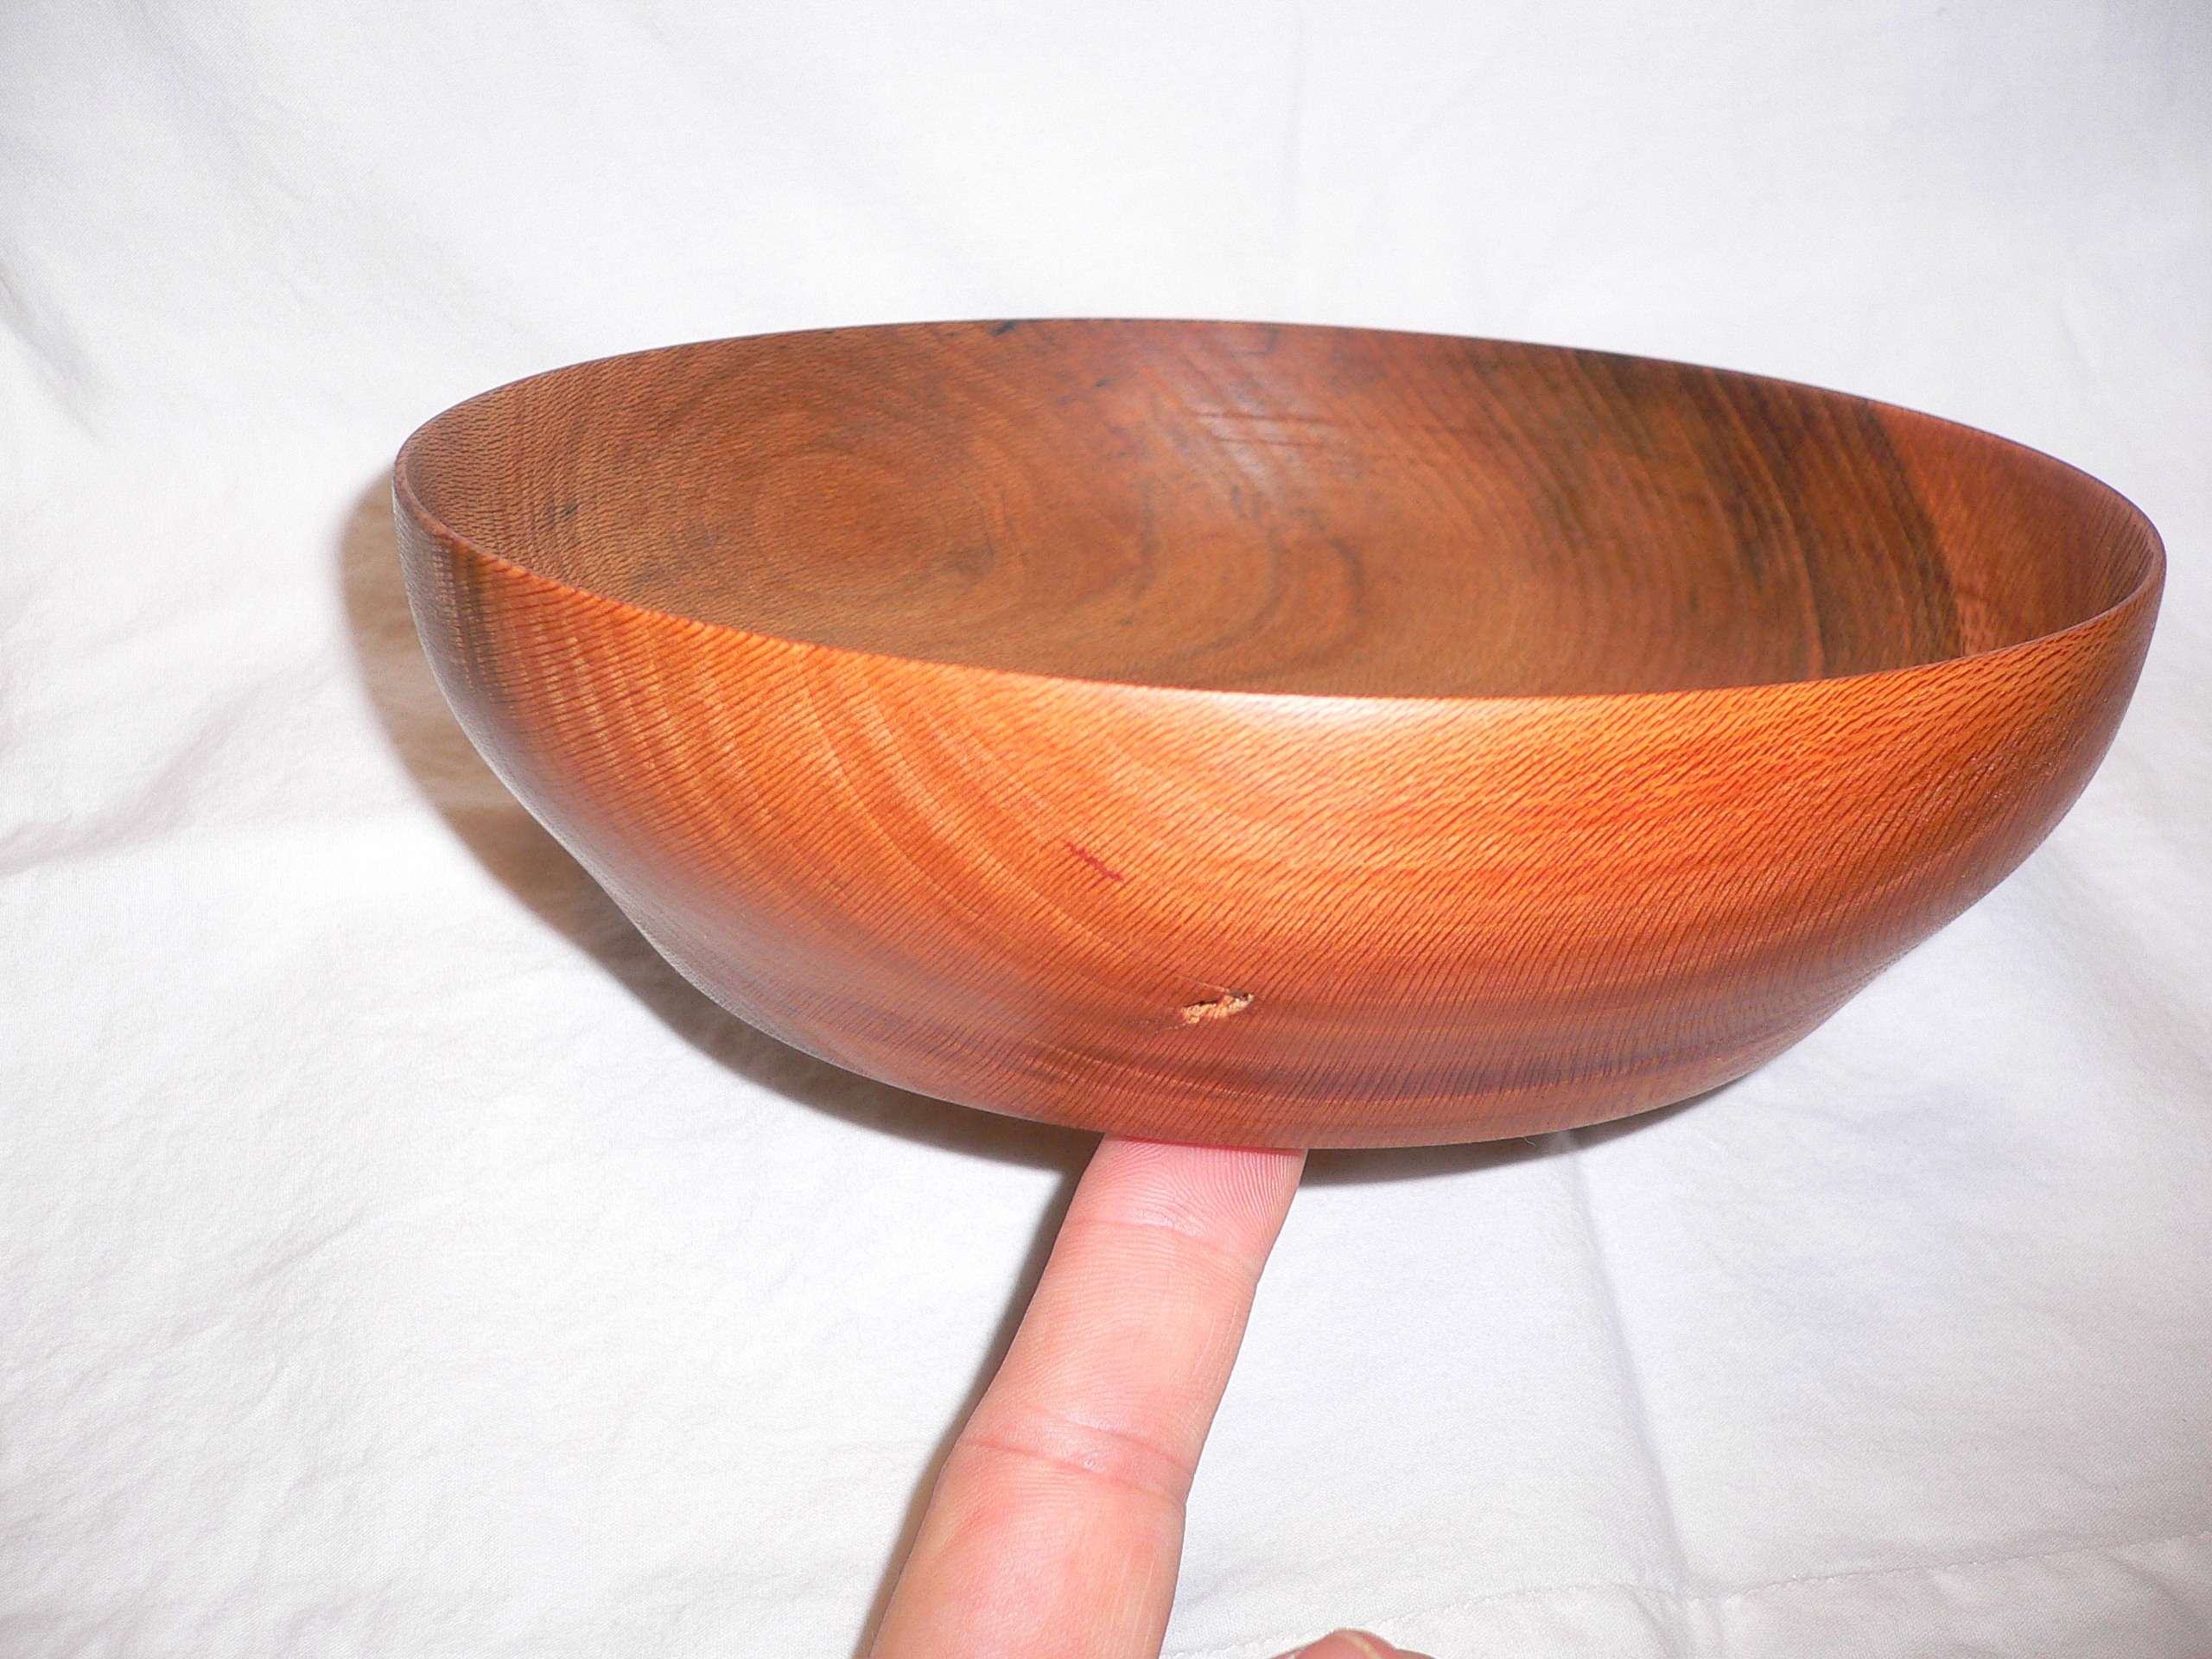 Newly turned Sycamore bowl